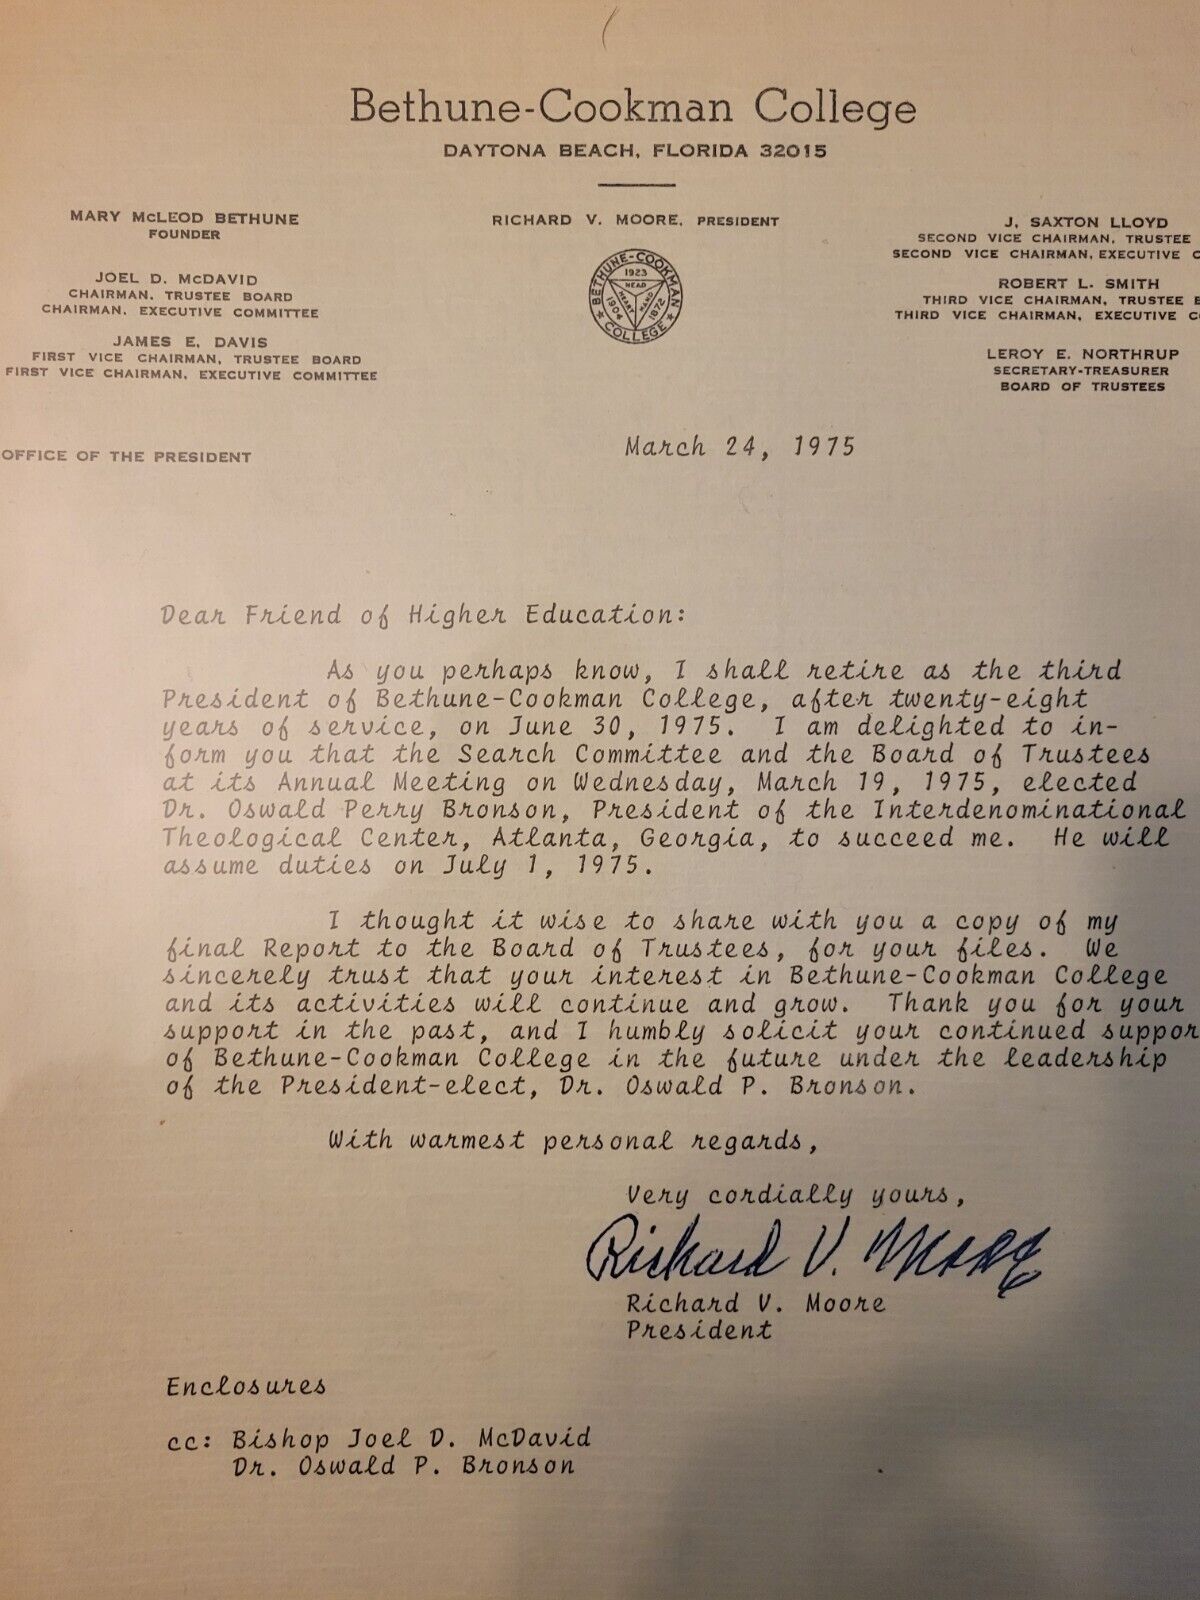 Super Rare Signed Letter From Bethune-Cookman College President, Richard Moore